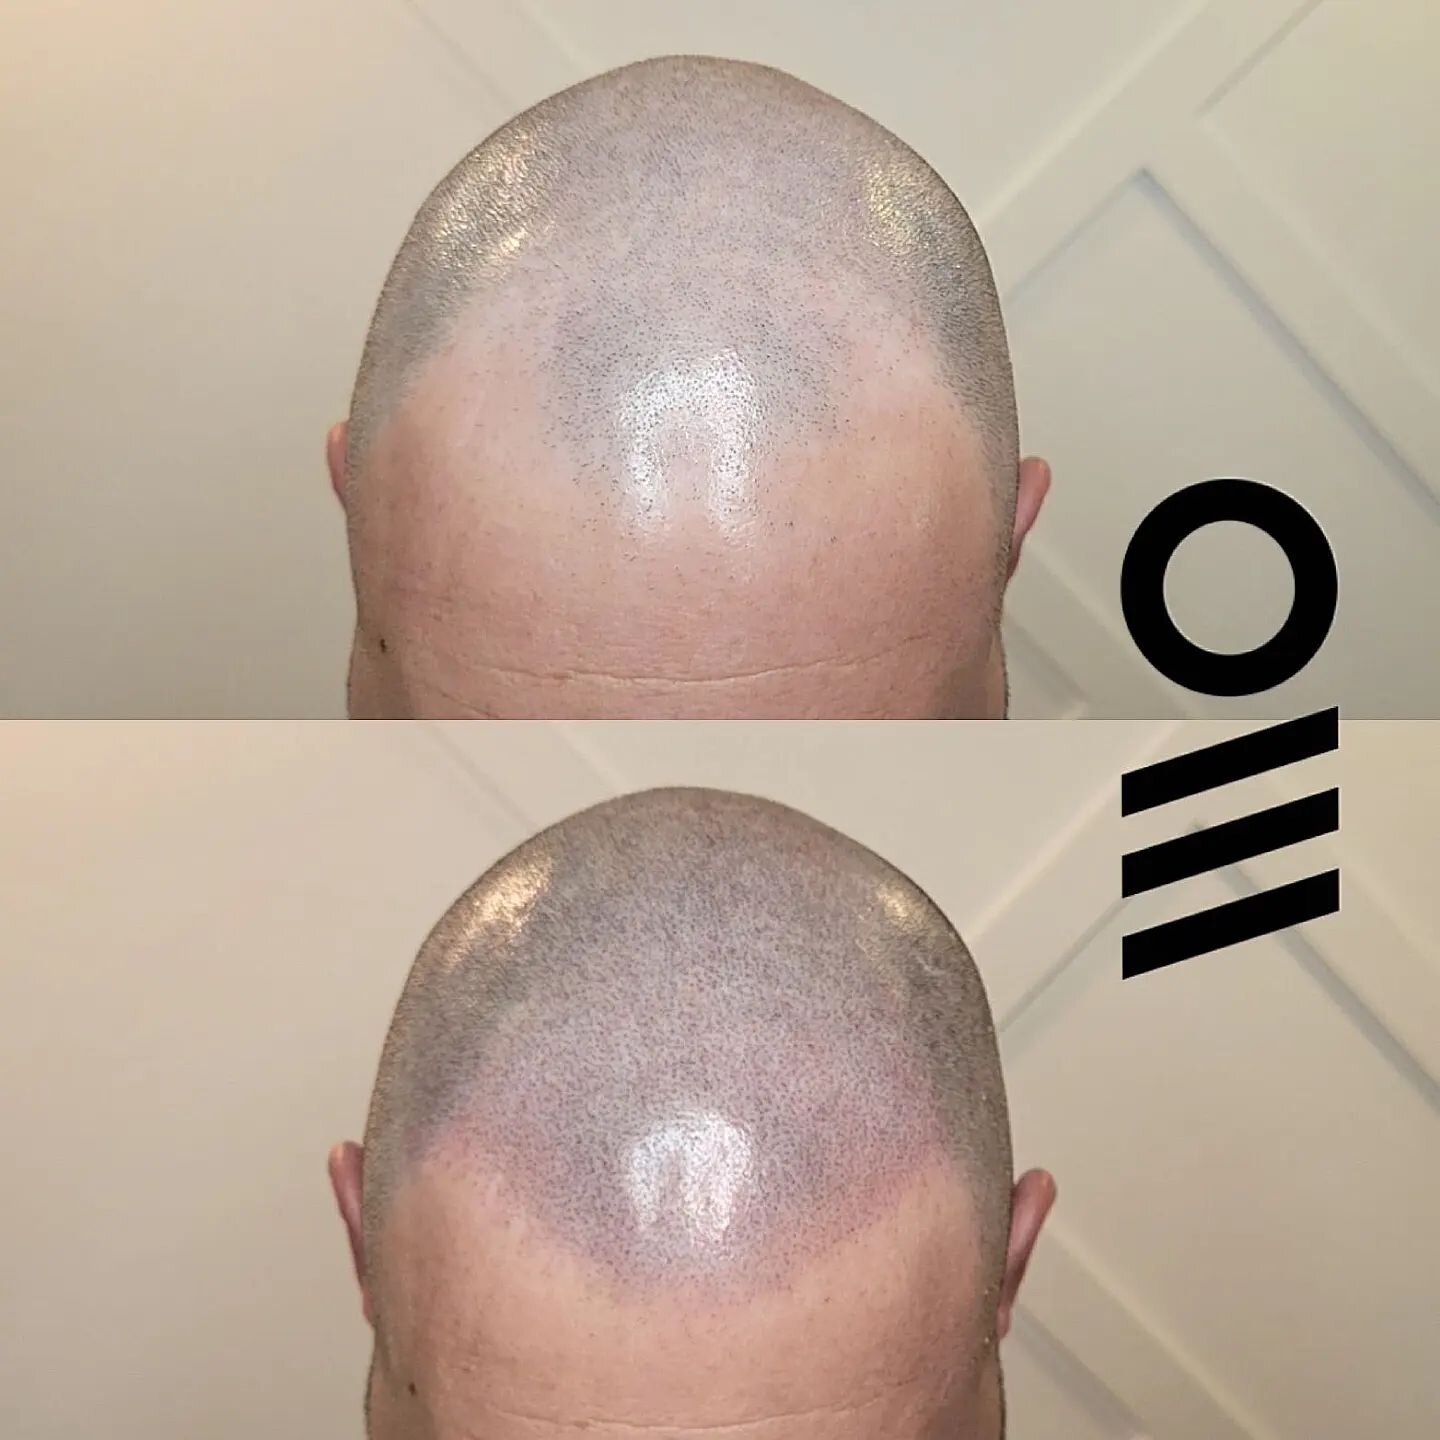 Round 1?! Yeah that's right. 2 to go 🤯 It's a crazy week here at @ink.barber as we enter the holiday season! ❄️
.
#scalpmicropigmentation #ink #tattoo #headtattoo #inkbarber #micropigmentation #hair #barber #beforeandafter #smp #smptraining